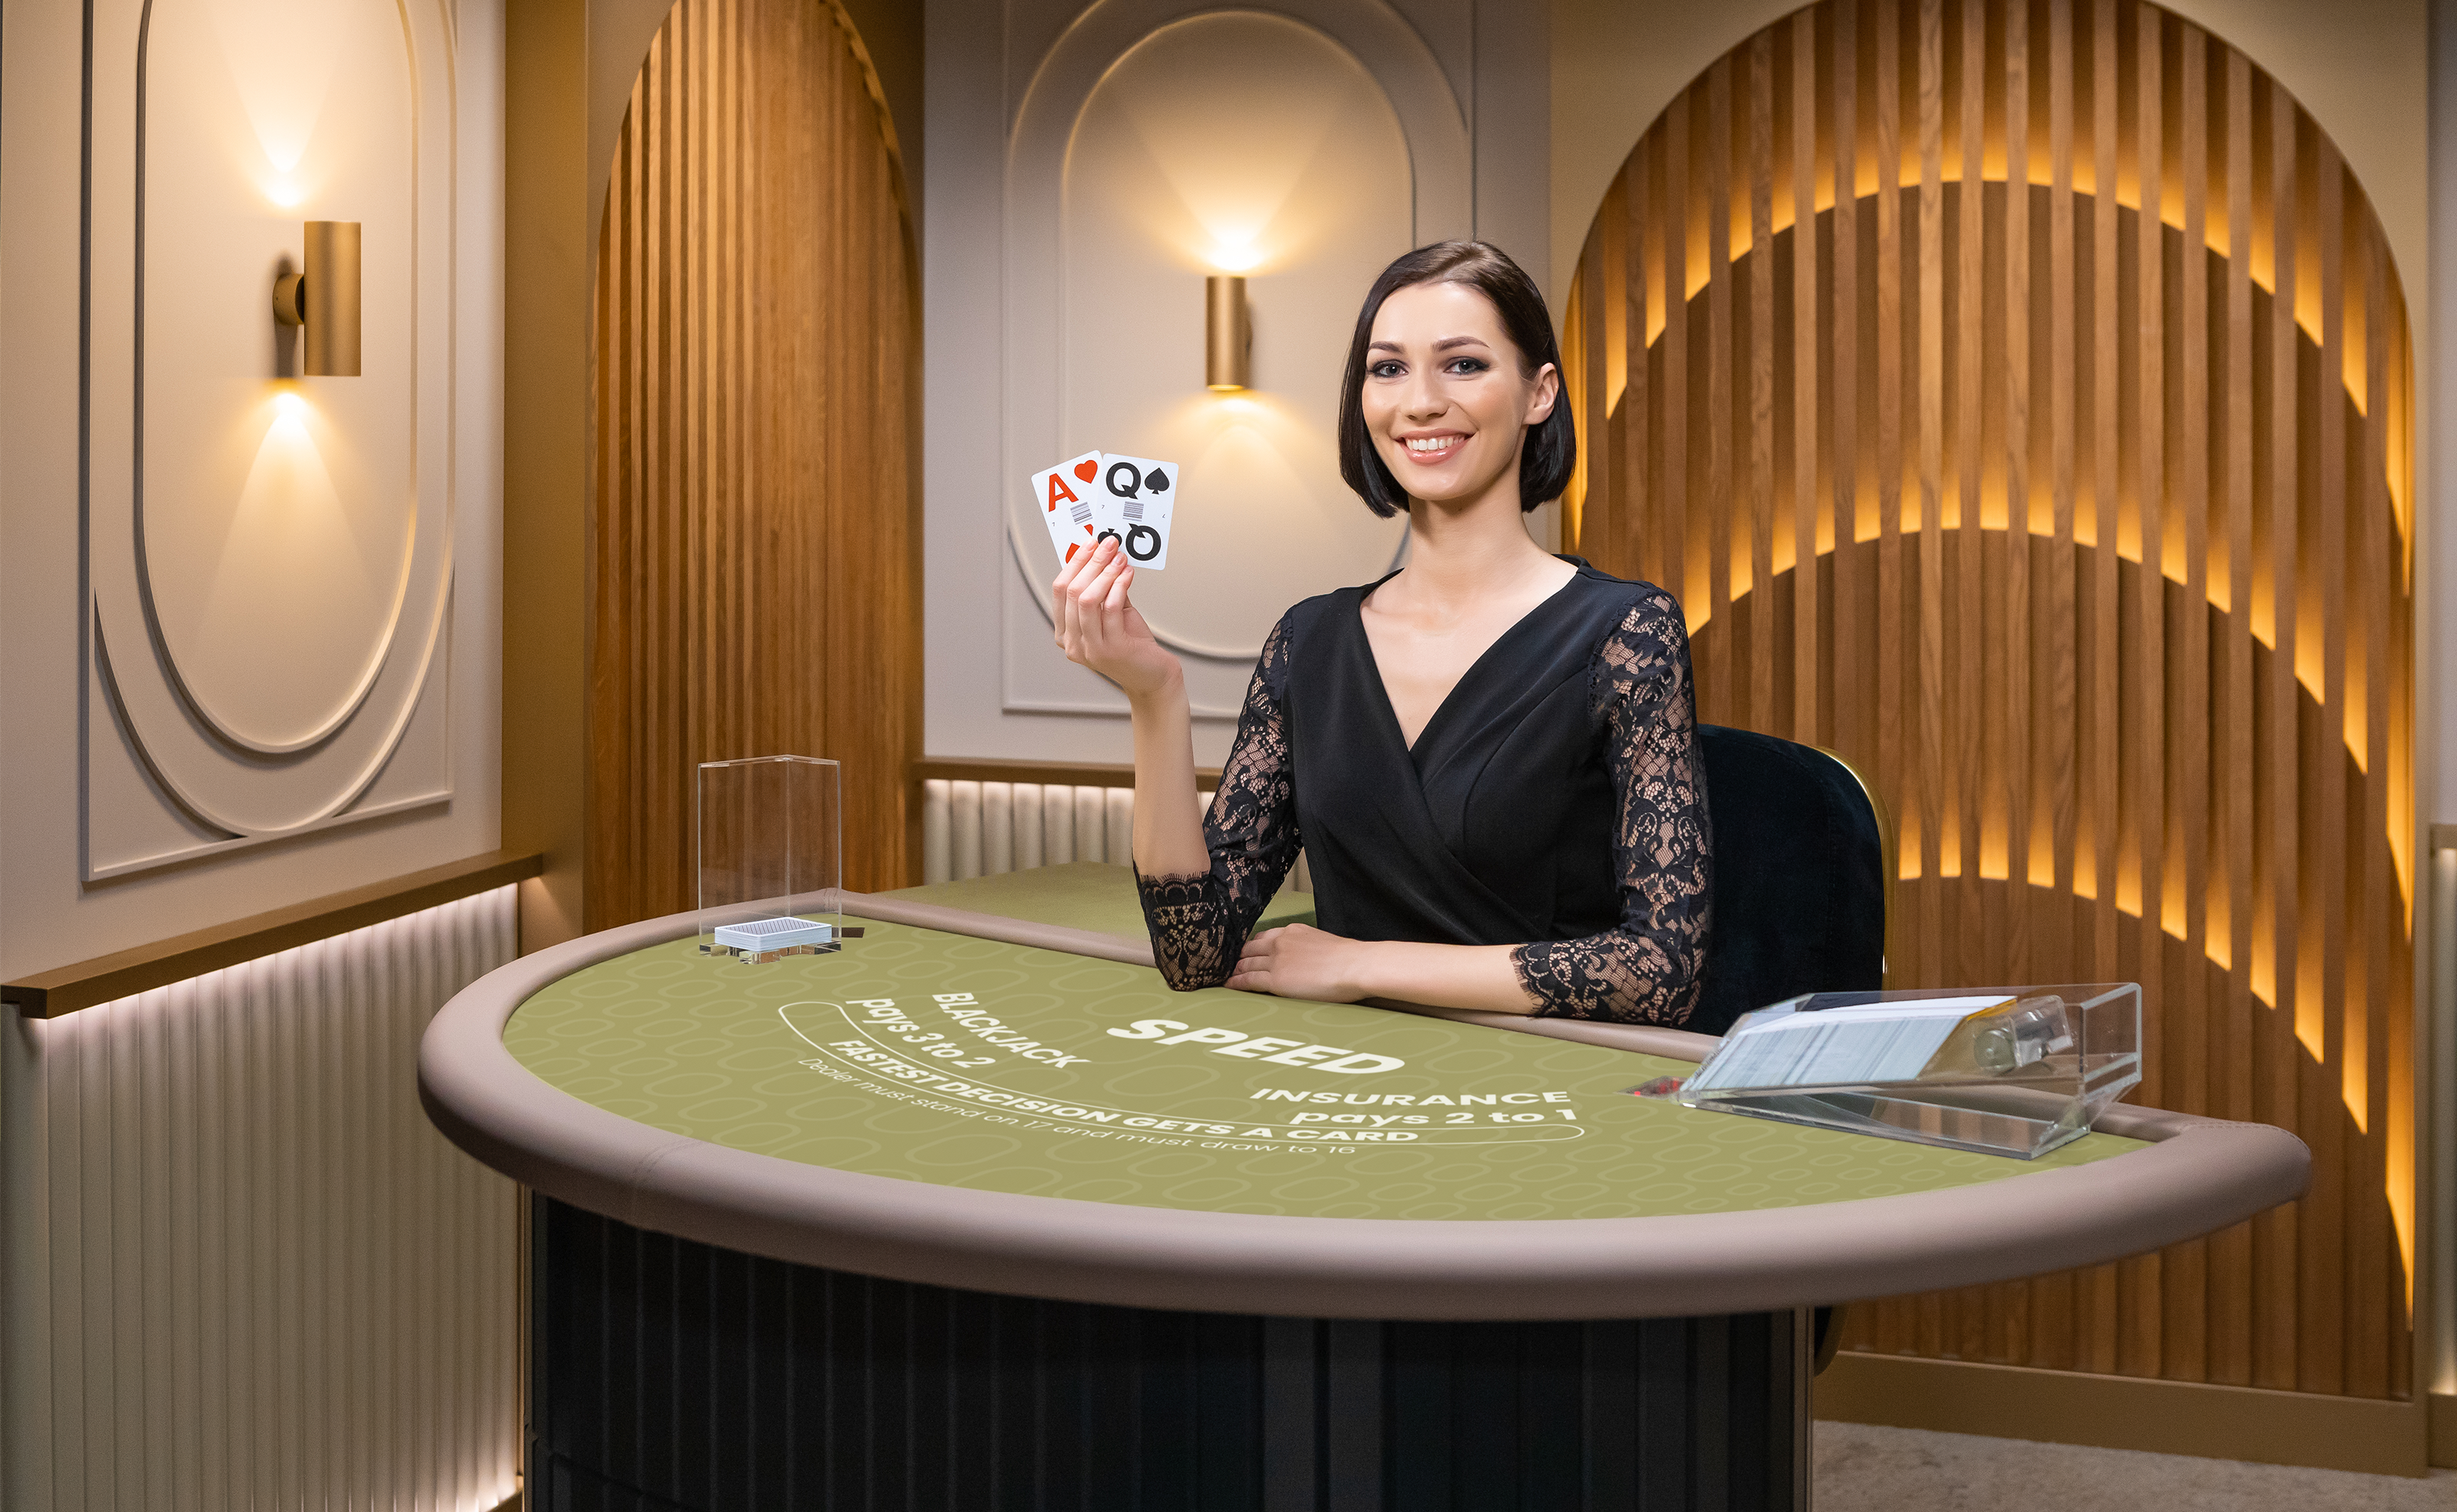 Female game presenter behind a Blackjack table holding up 2 cards in a game of Speed Blackjack.